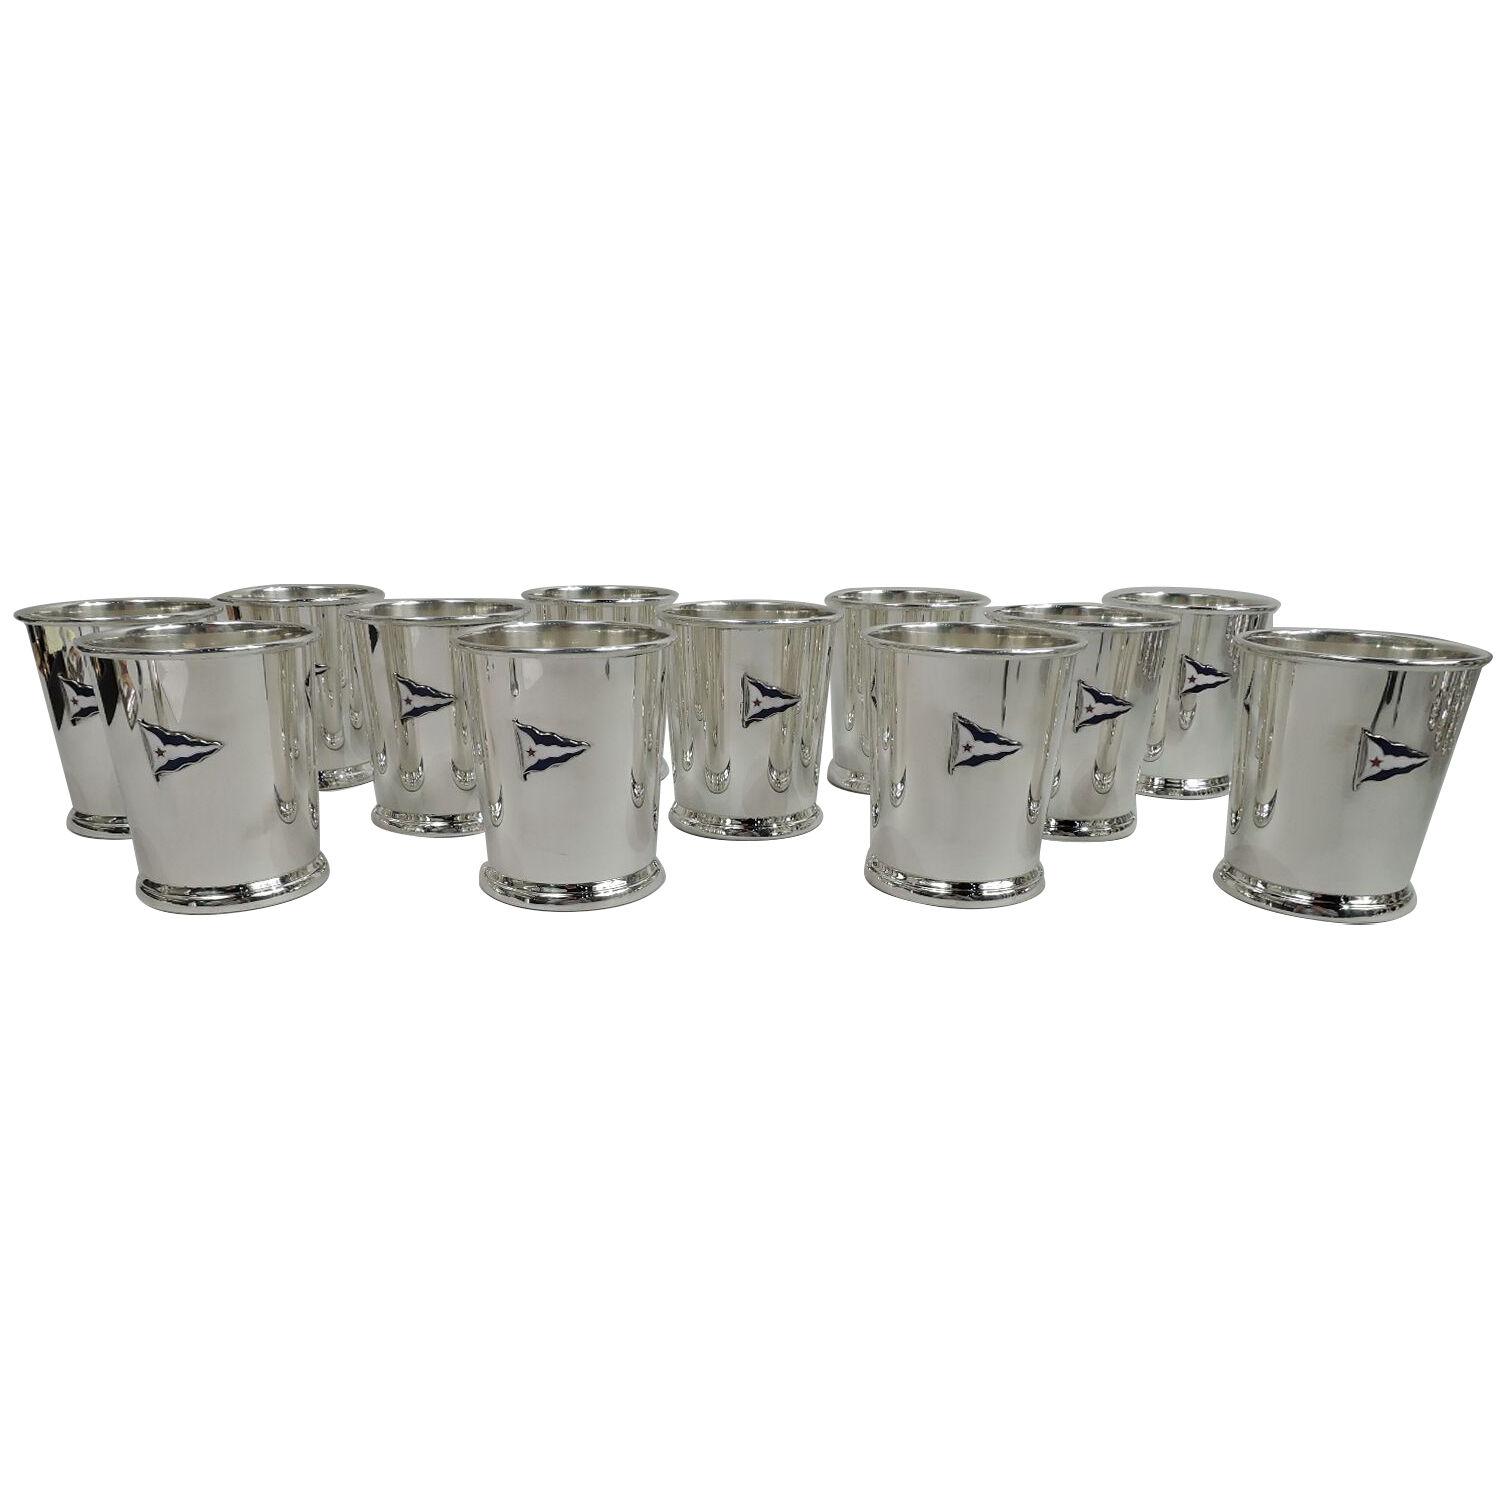 Set of 12 American Mint Juleps with Chicago Yacht Club Burgee